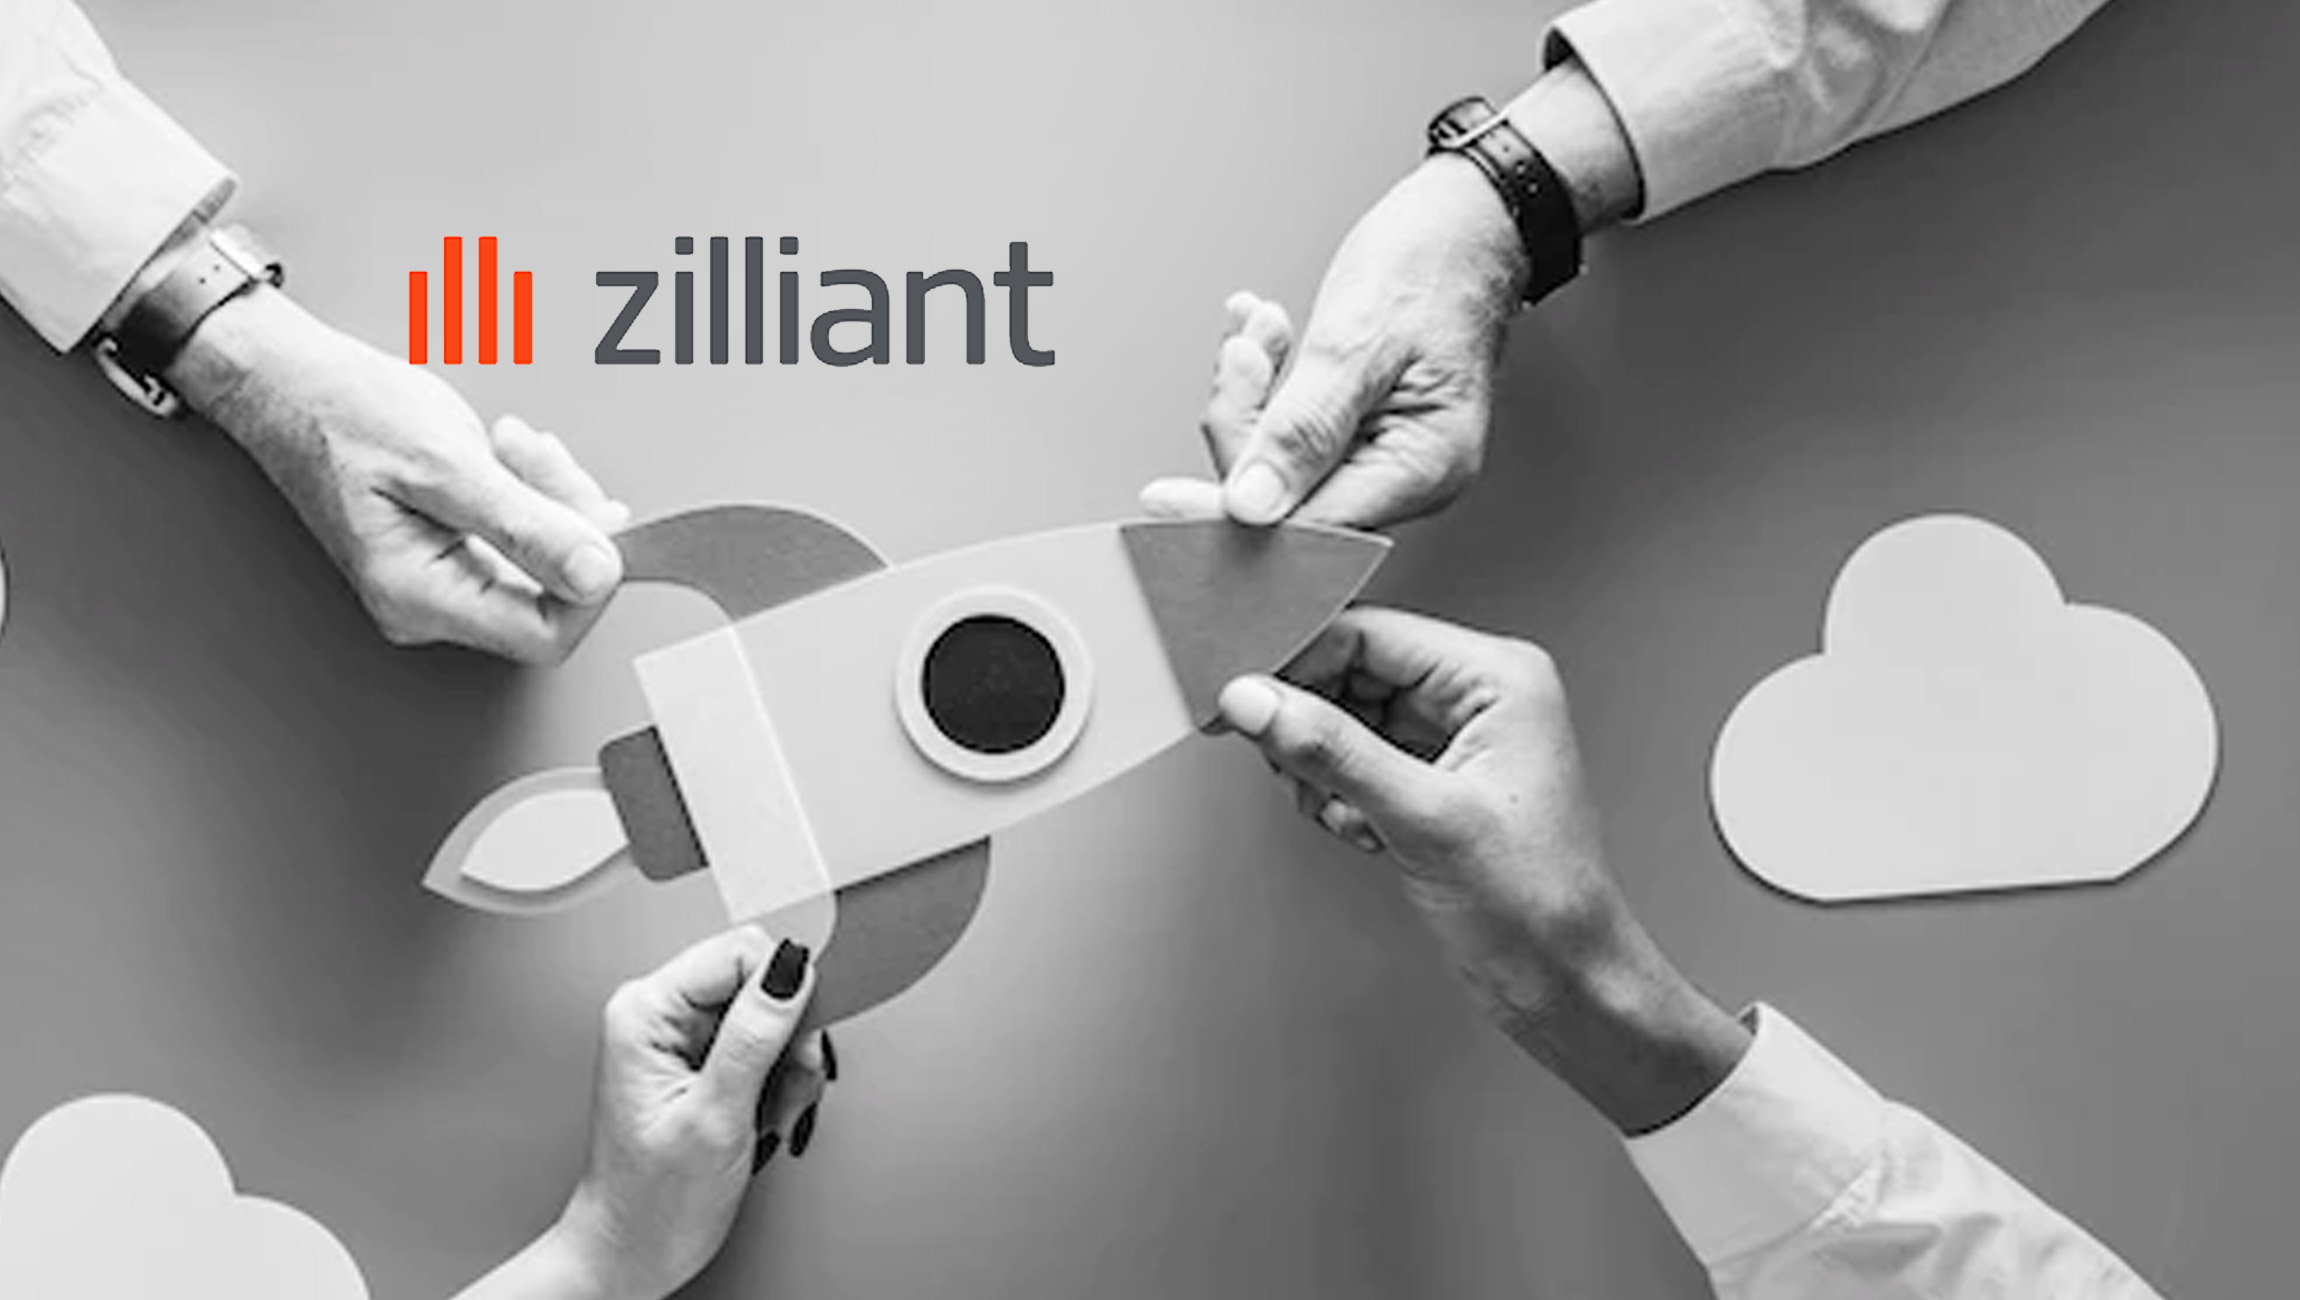 Zilliant Launches Quick Start Program to Speed Time to Value and First Quick Start Package, Transforming How Companies Manage Pricing in Response to Inflation